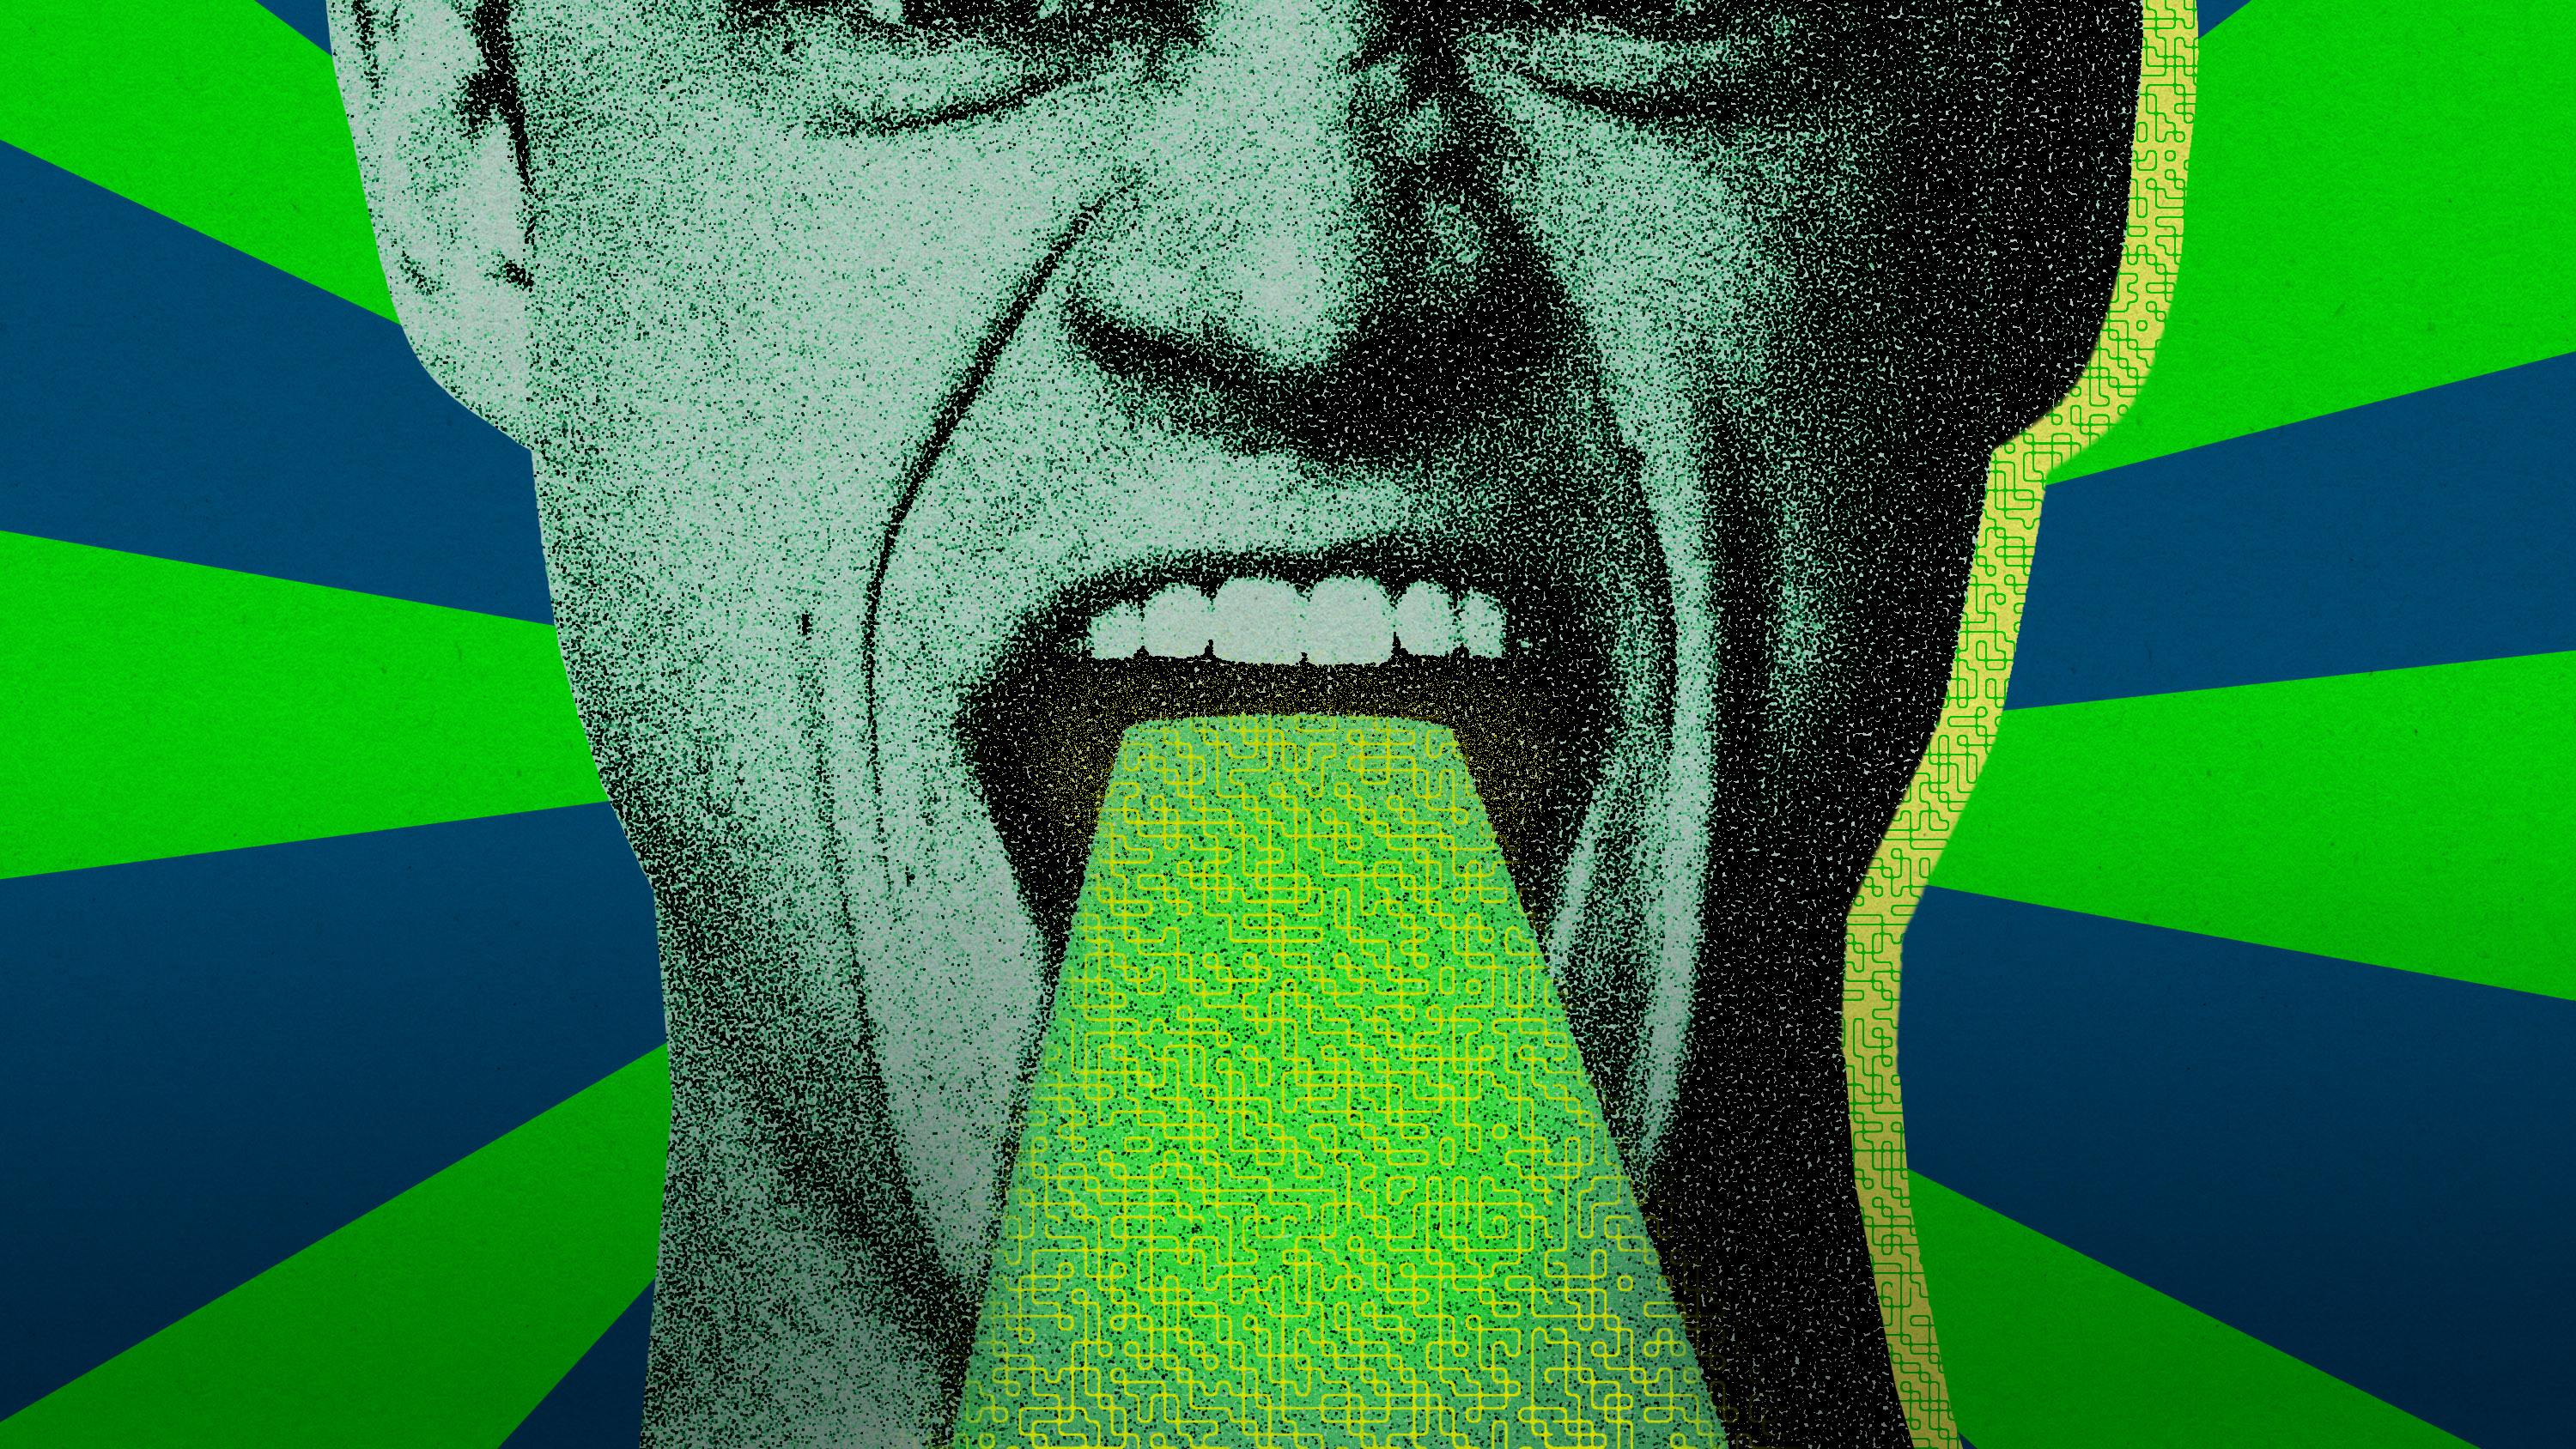 person with digital pattern emitting from mouth in the style of an agit-prop poster